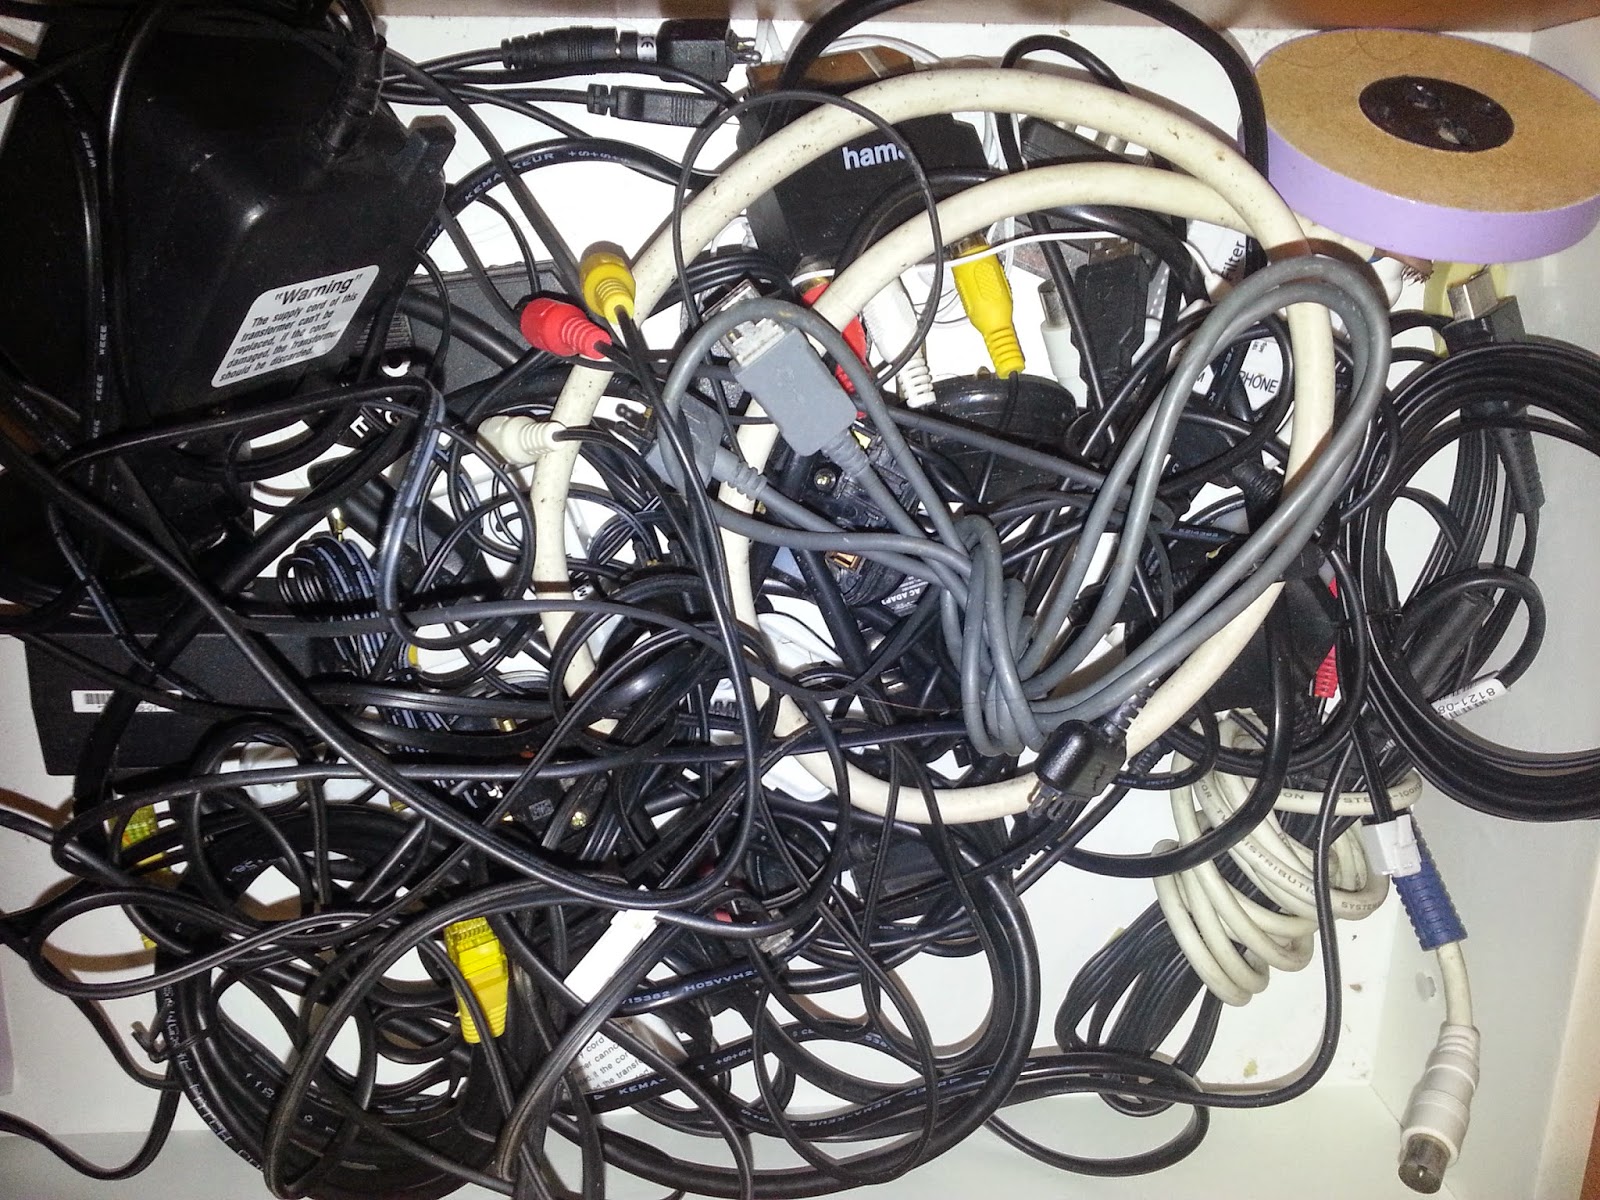 Drawer full of assorted wires. 